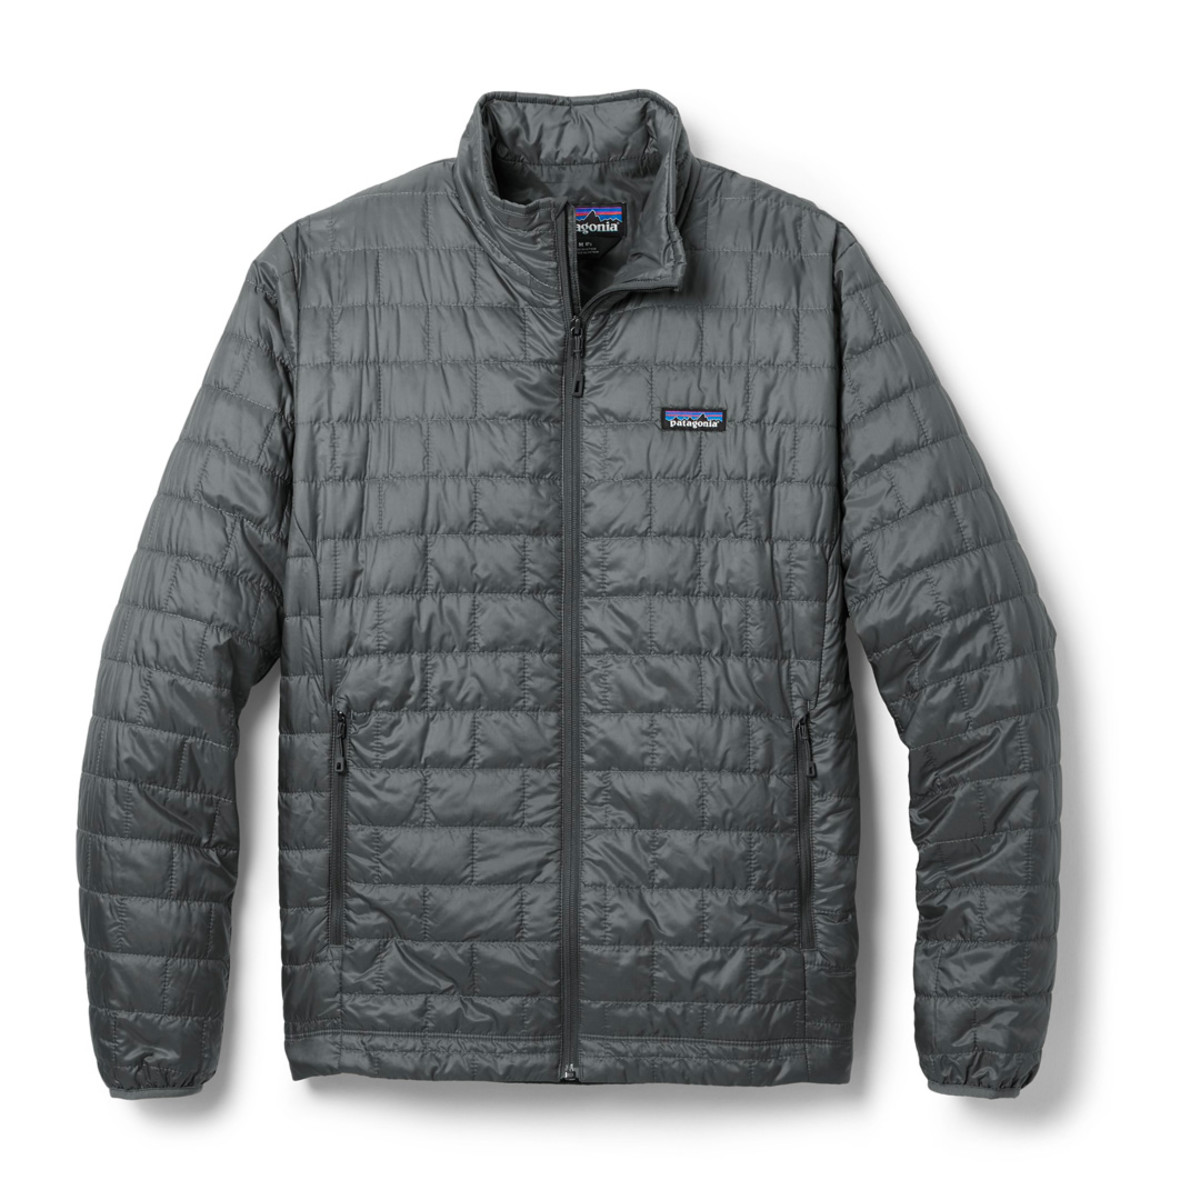 Sale: The Patagonia Nano Puff Jacket Is Up to 40% Off